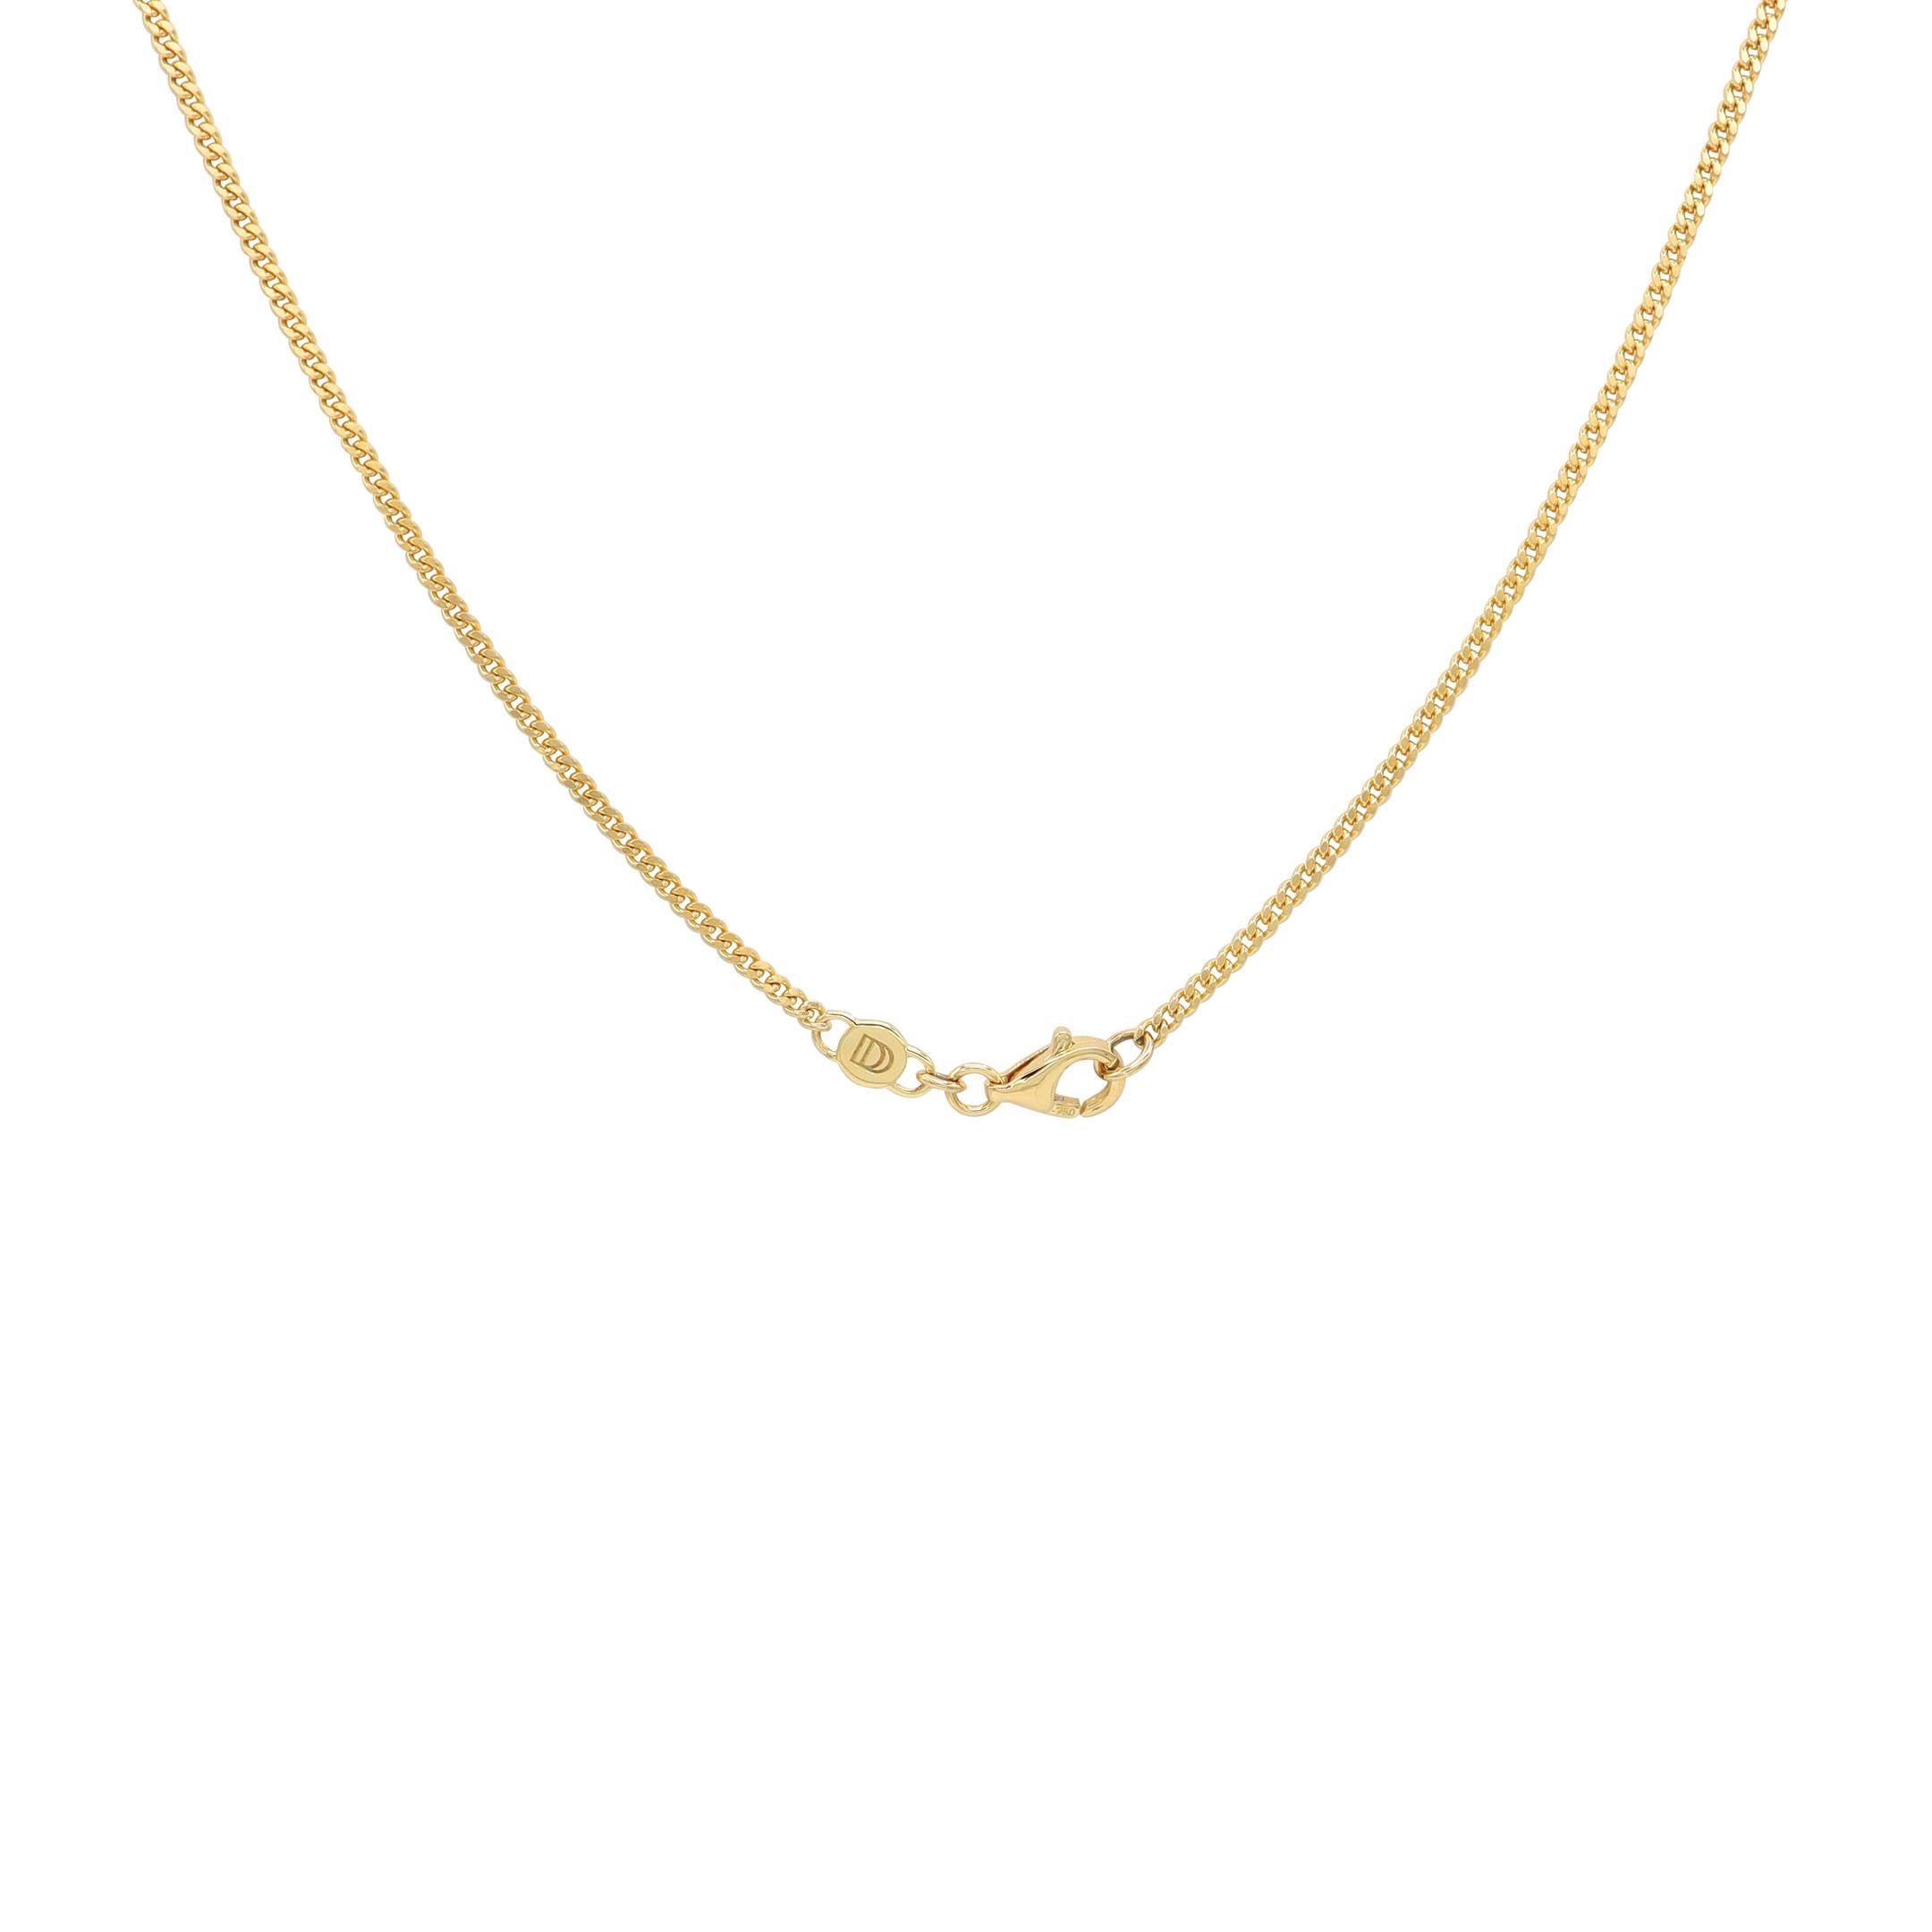 The Dainty Sapphire Collection
This collection is a reminder of the golden phrase: Less is more. These minimalist pieces are made to be part of your everyday essentials. Whether you’re feeling more feminine or feeling more casual, this collection